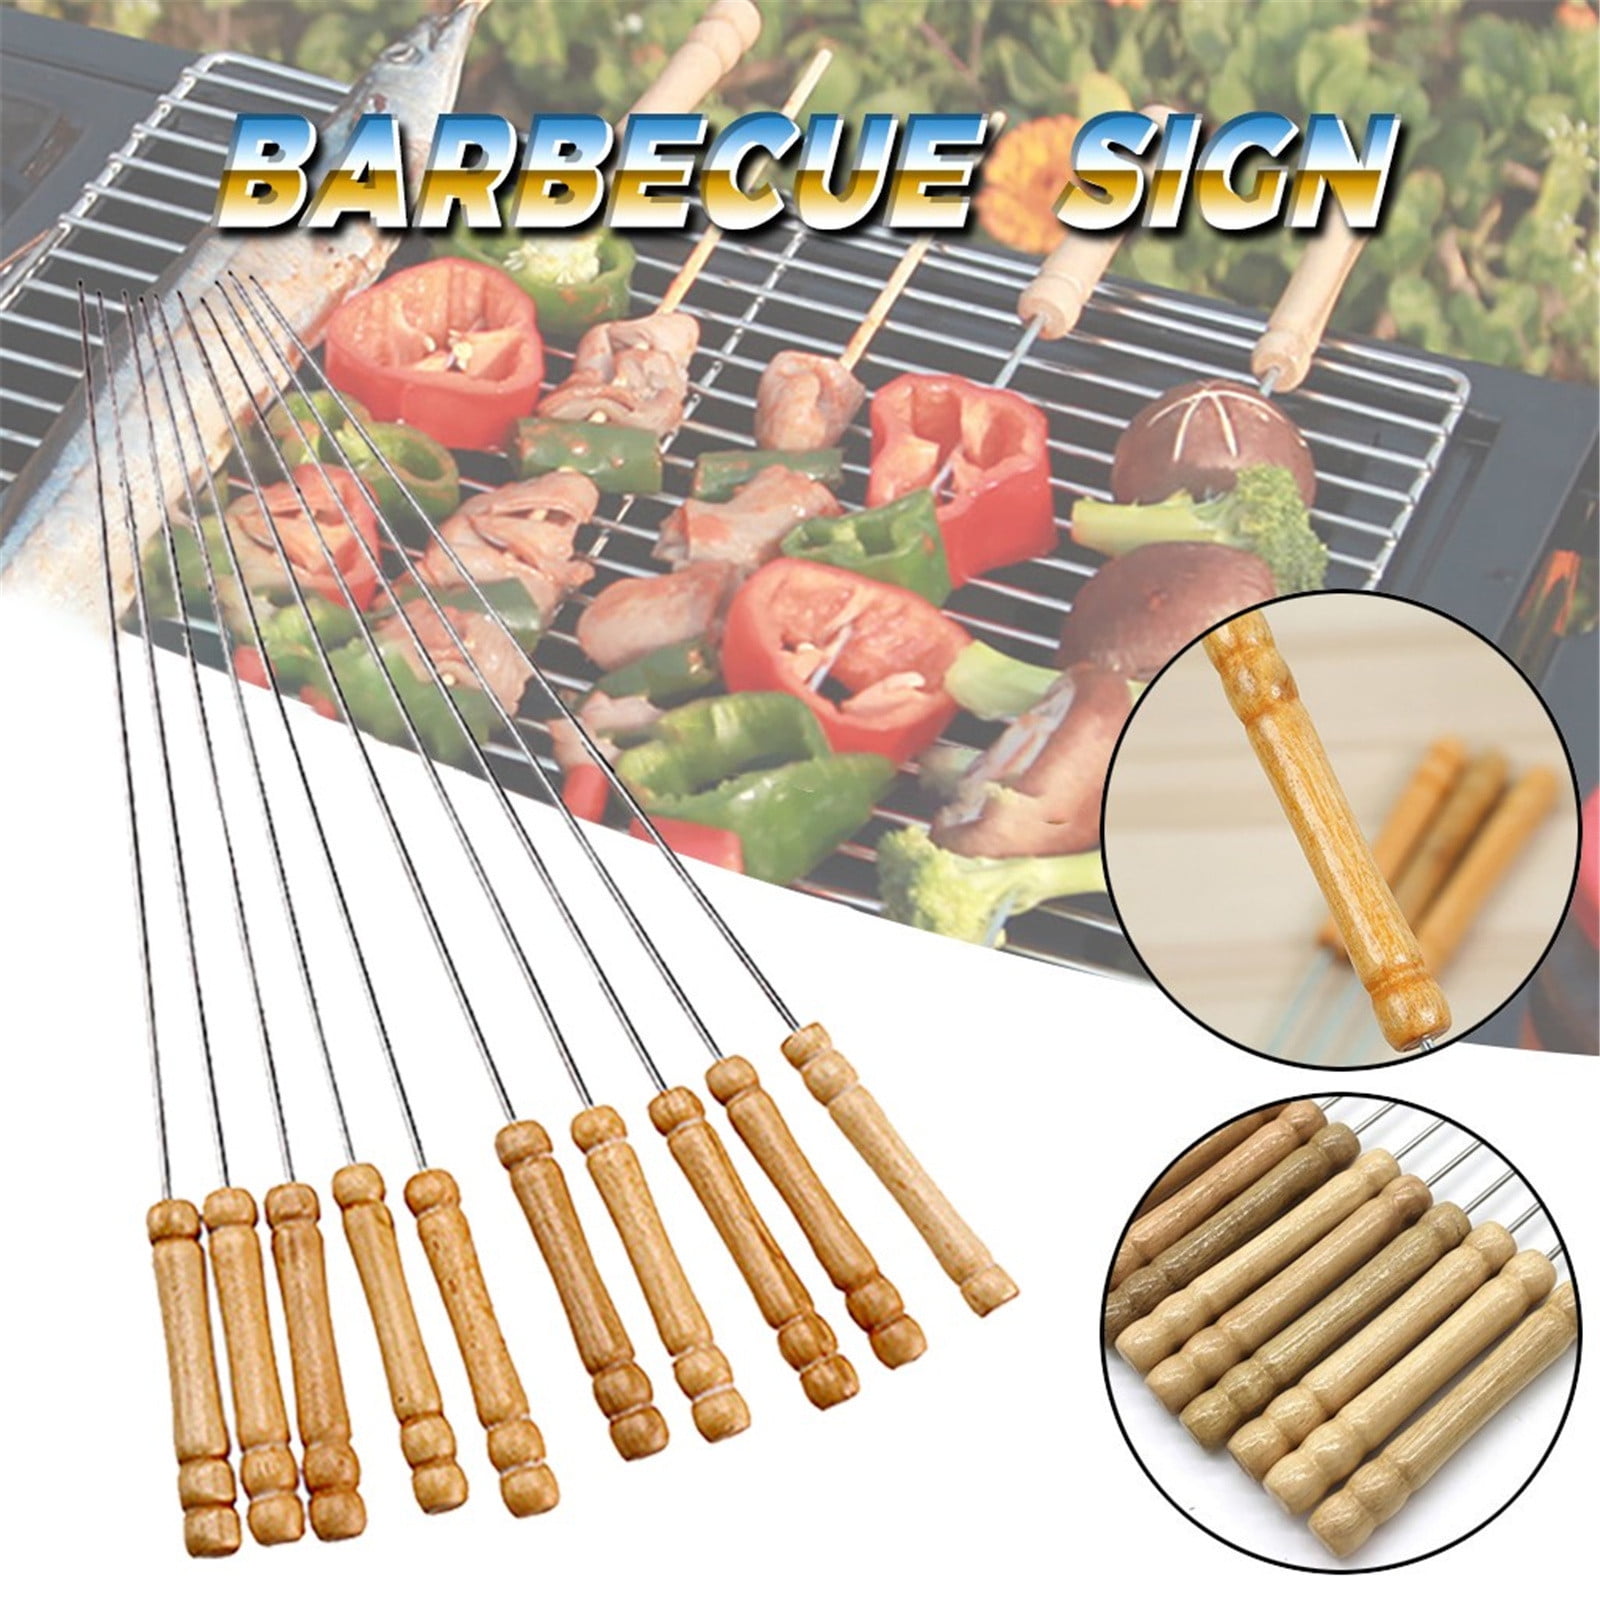 LauKingdom Grill Sticks/Roasting Sticks,Long Stainless Steel Barbecue Skewers for Grilling Set of 7 Piece with Sturdy Packed Heavy Duty Wide BBQ Sticks Ideal for Shish Kebab 16 Inch Orange 